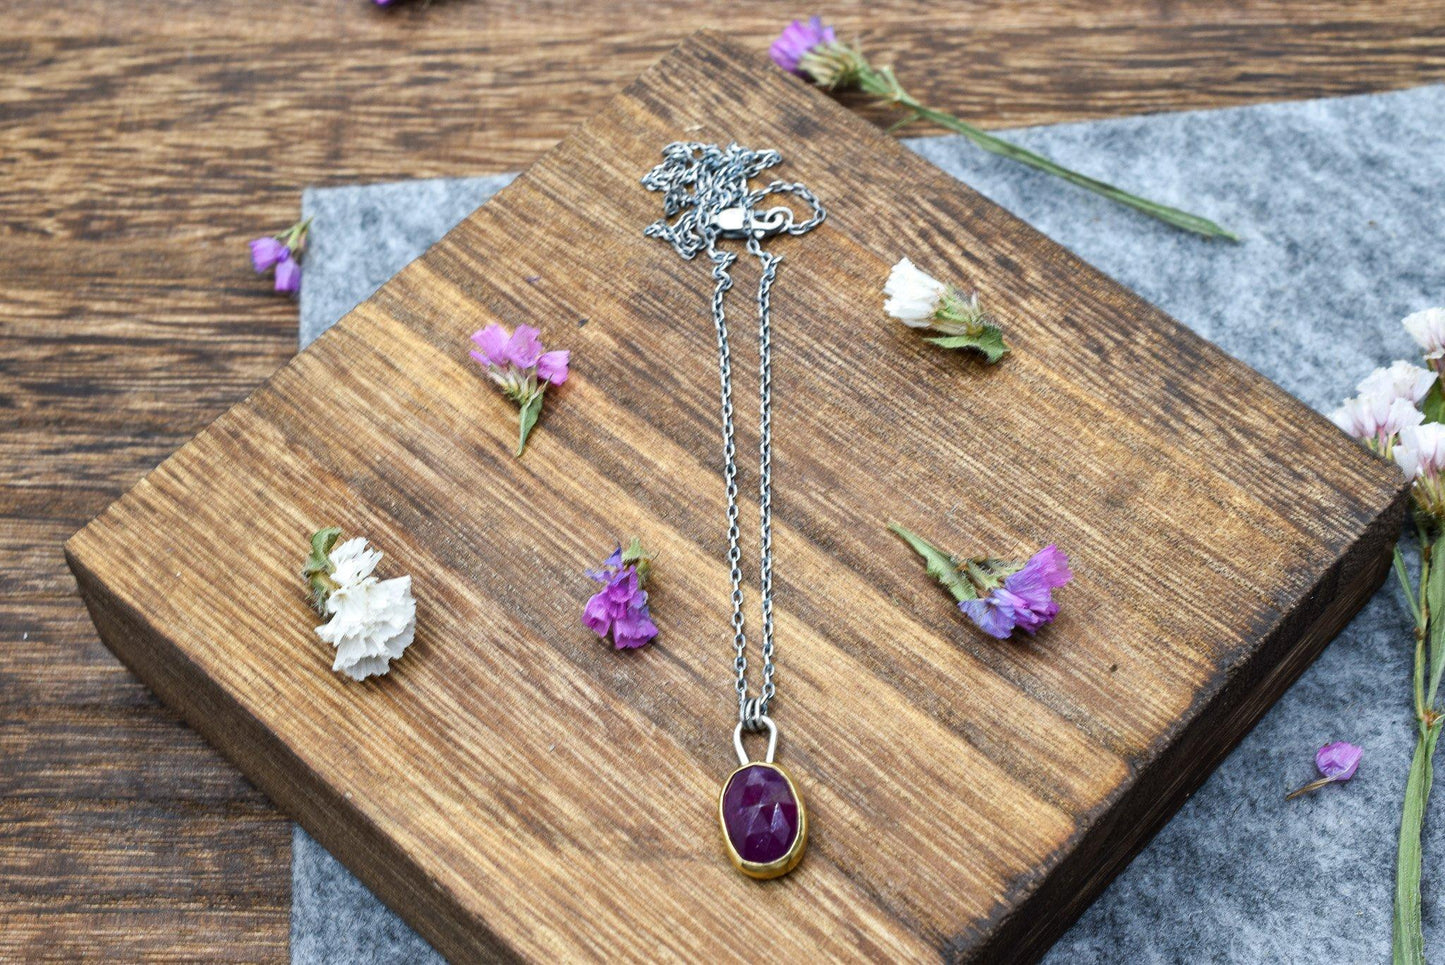 18k Gold, Rose Cut Pink Sapphire, Mixed Metals Necklace